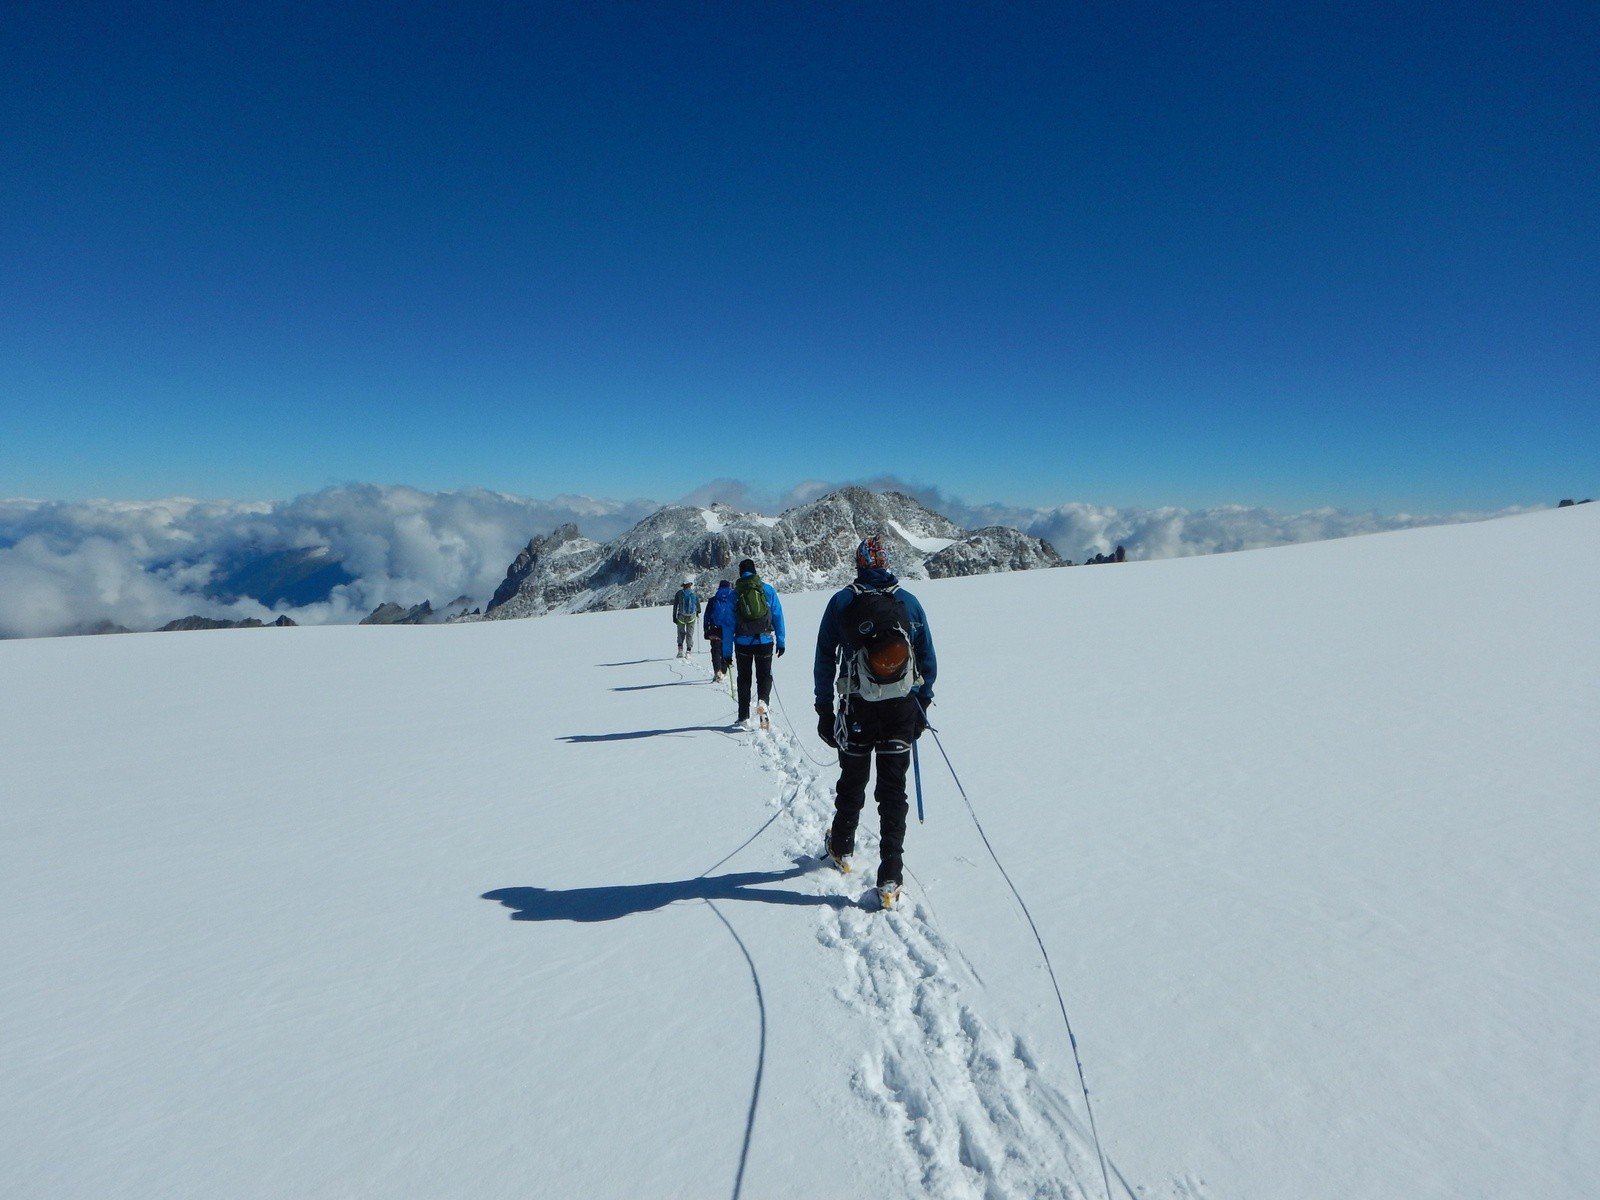 Hikers roped together on Mont Blanc, in the snow